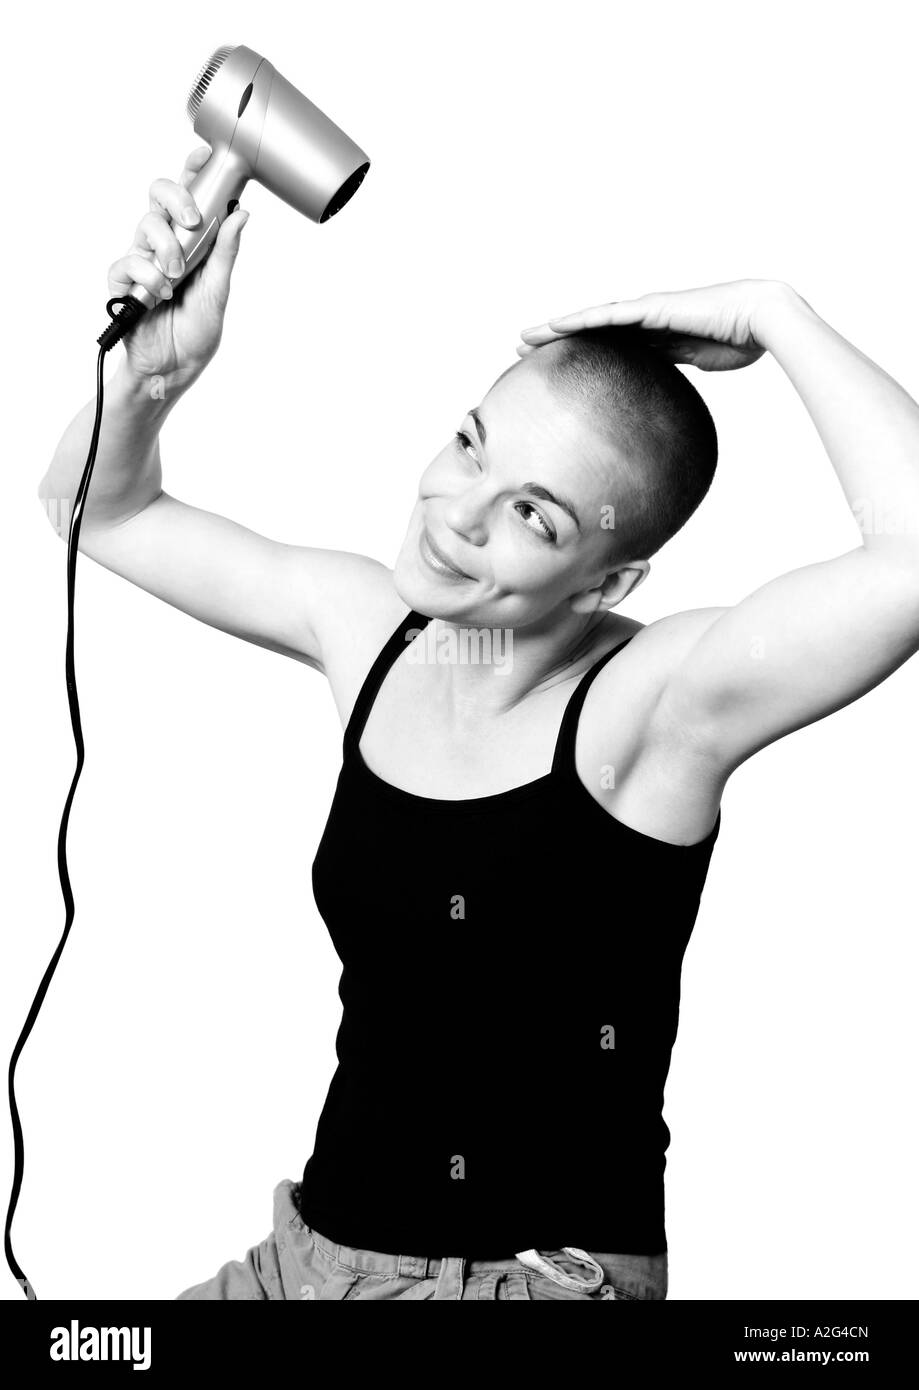 woman trying to style her cropped hair with dryer Stock Photo